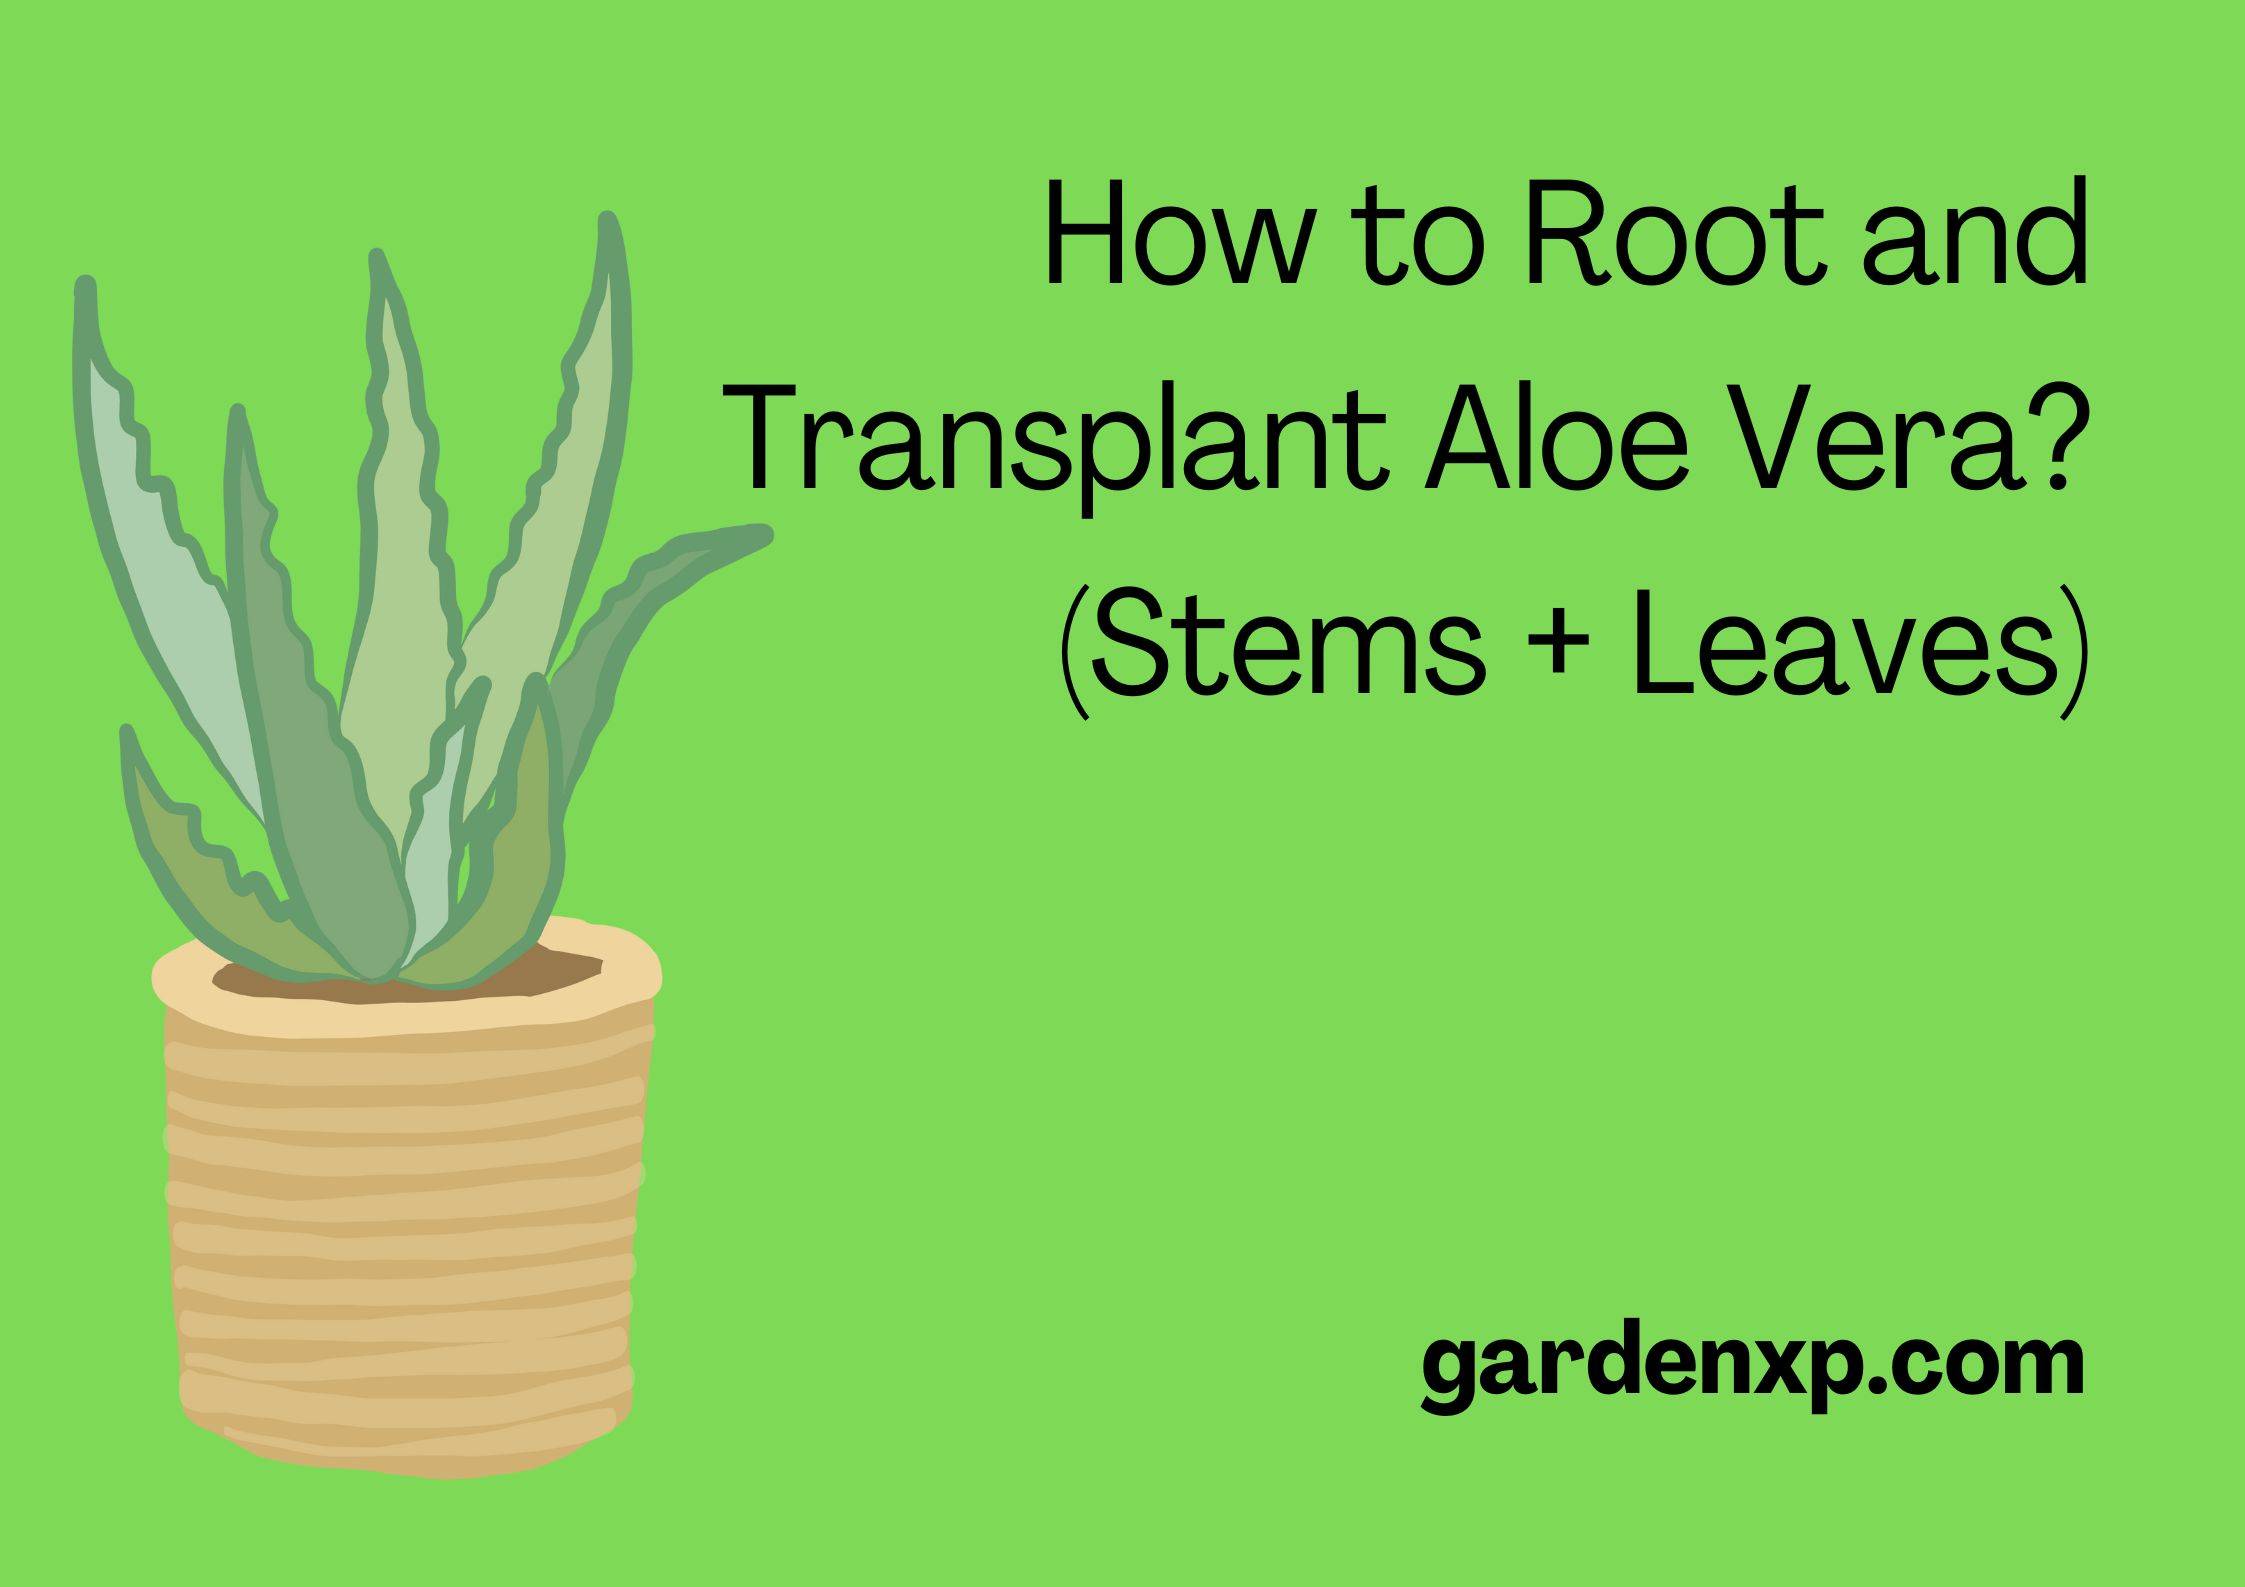 How to Root and Transplant Aloe Vera? (Stems + Leaves)